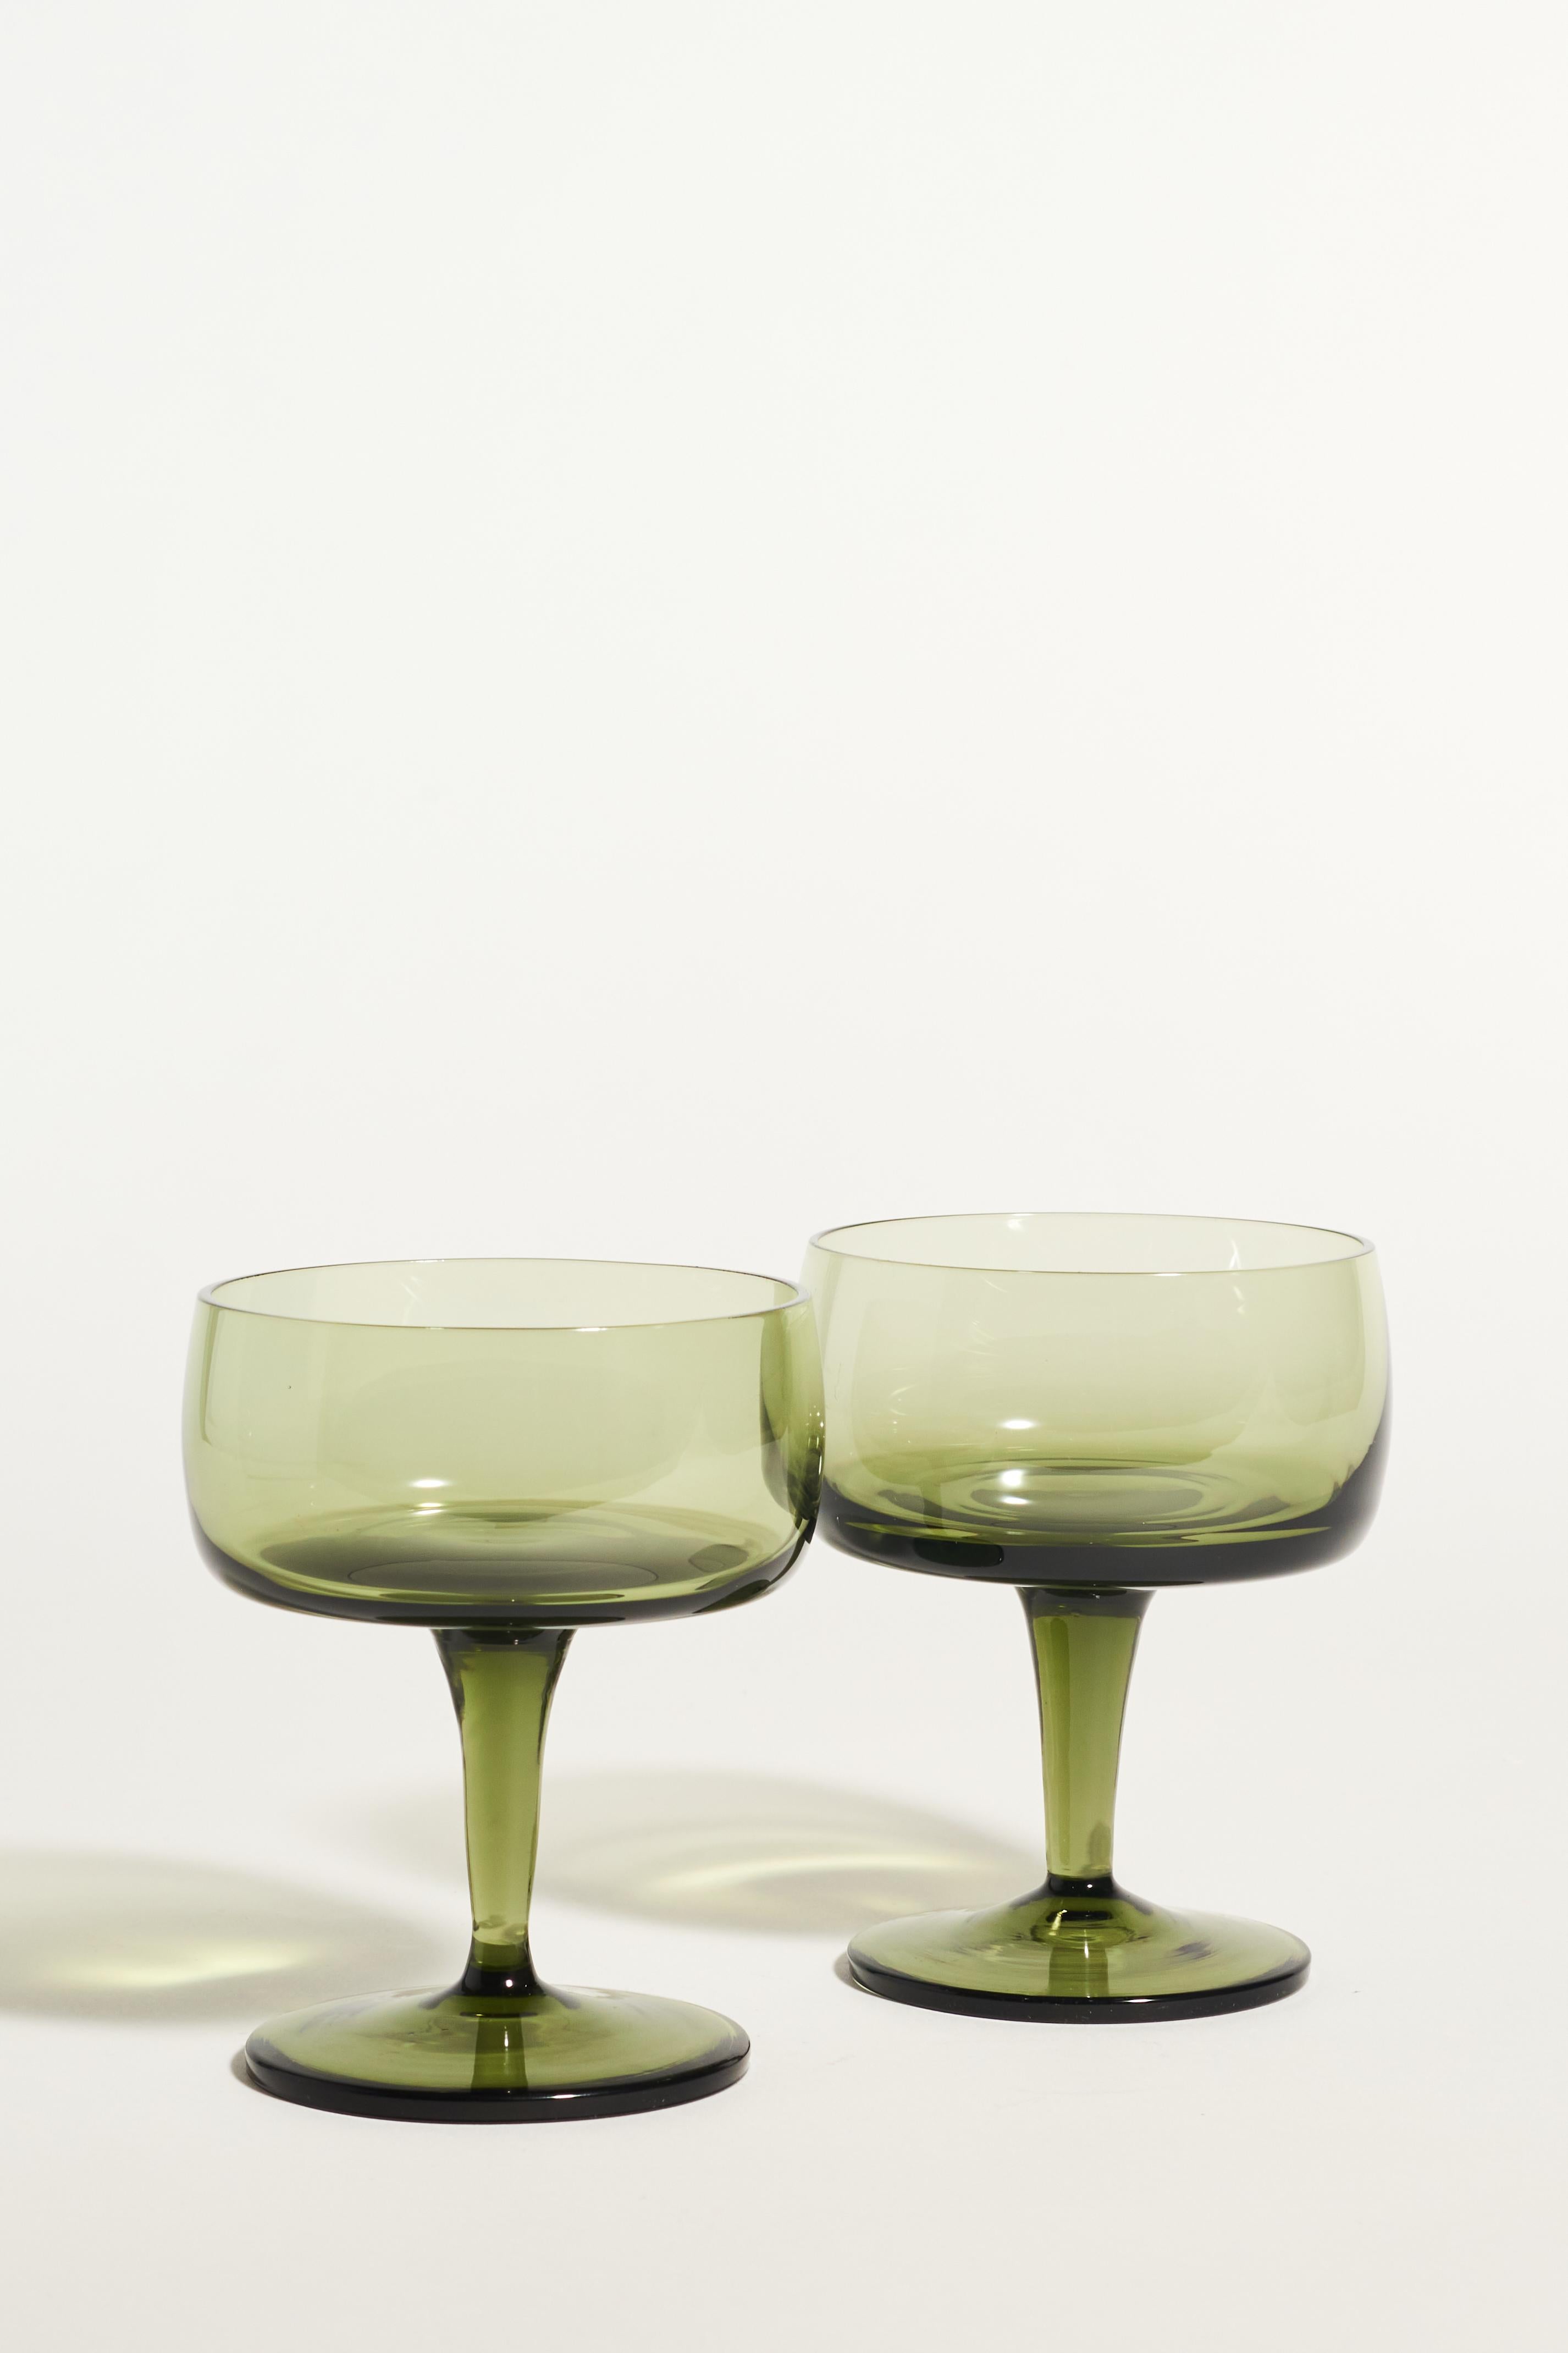 Olive green cocktail glasses with tapered stems.